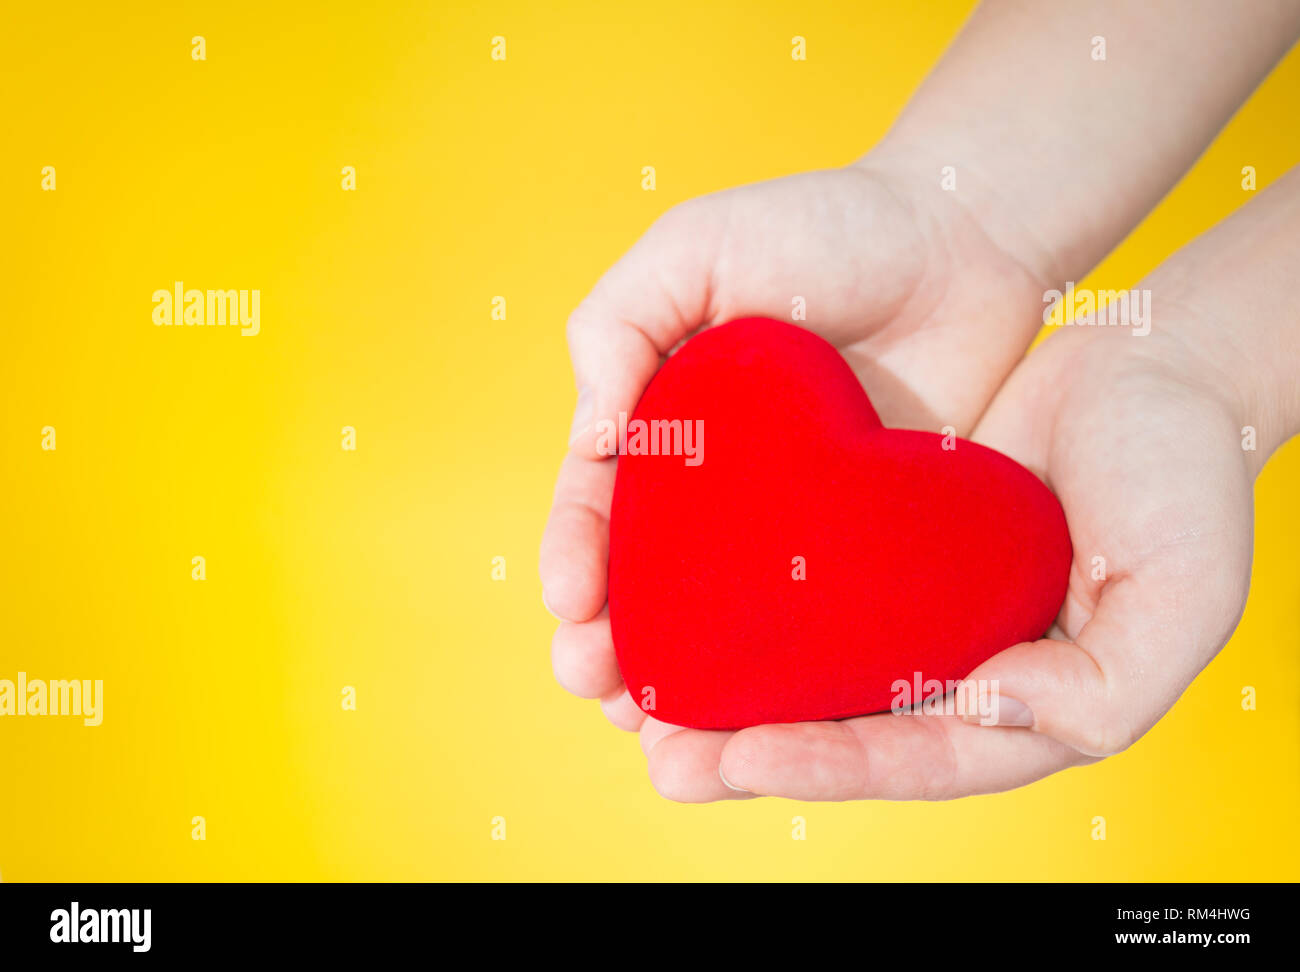 red heart is holding in hands on yellow Stock Photo